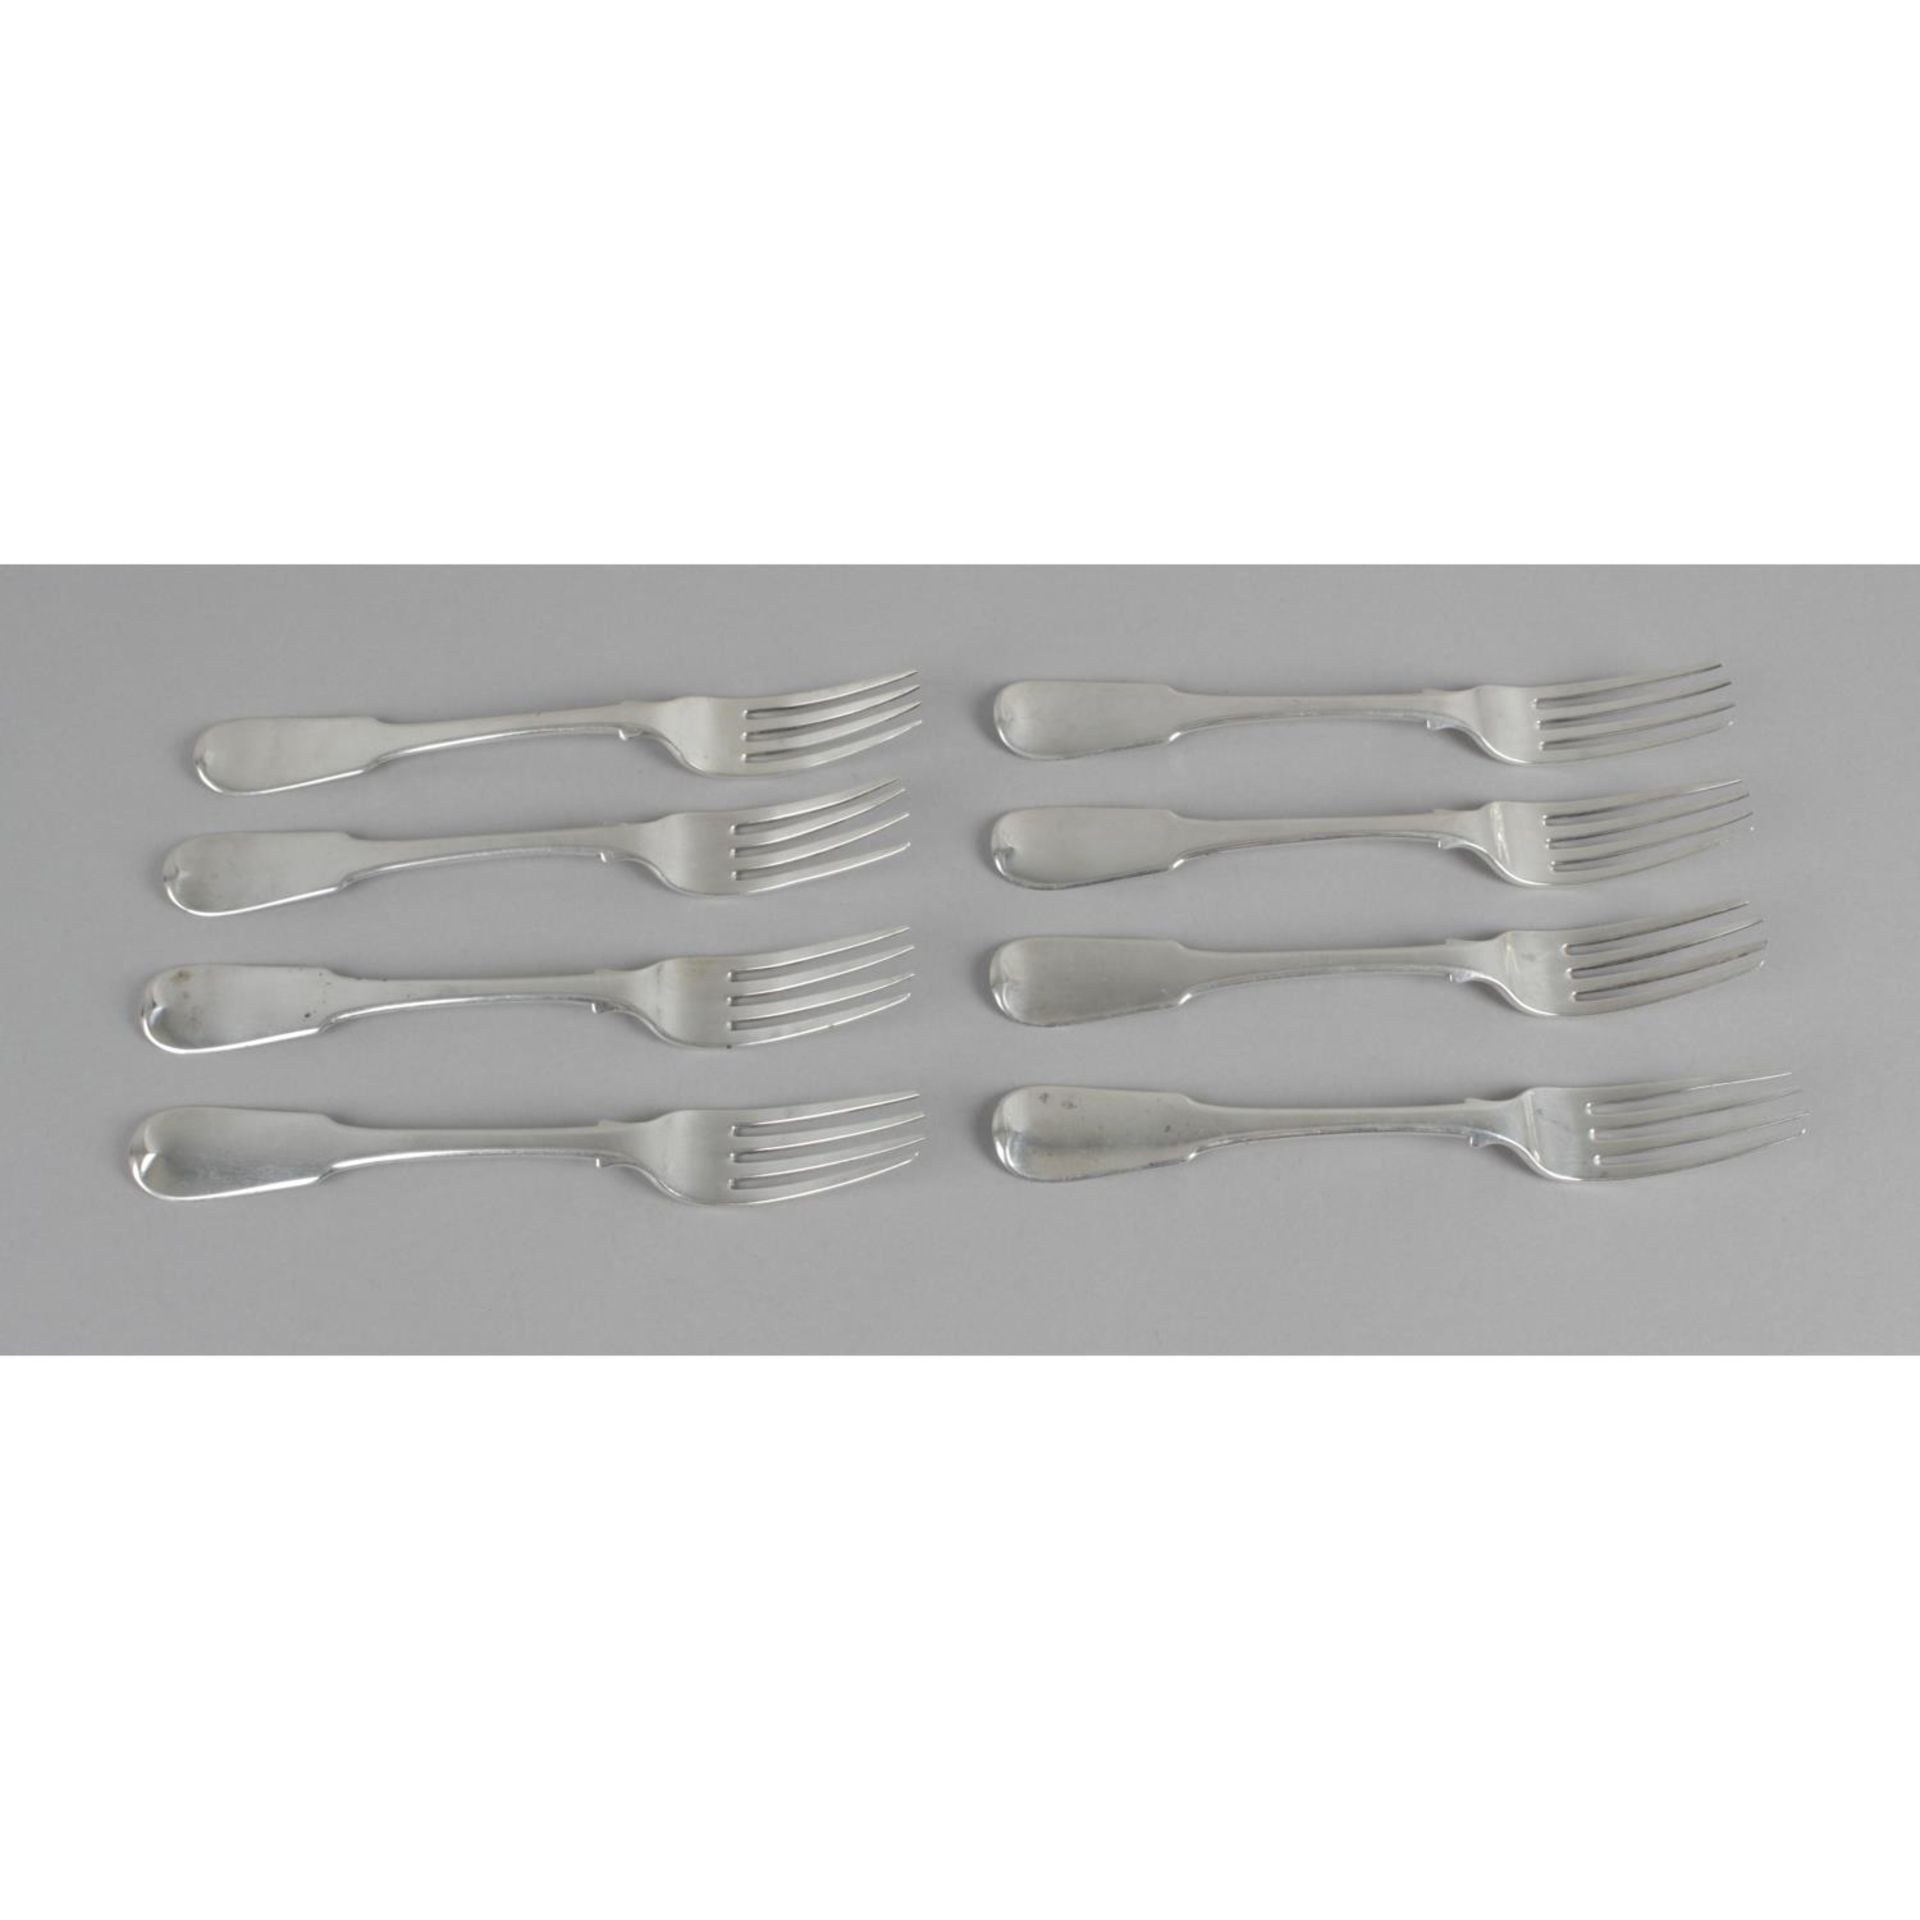 A selection of Scottish silver spoons and forks, - Image 6 of 6